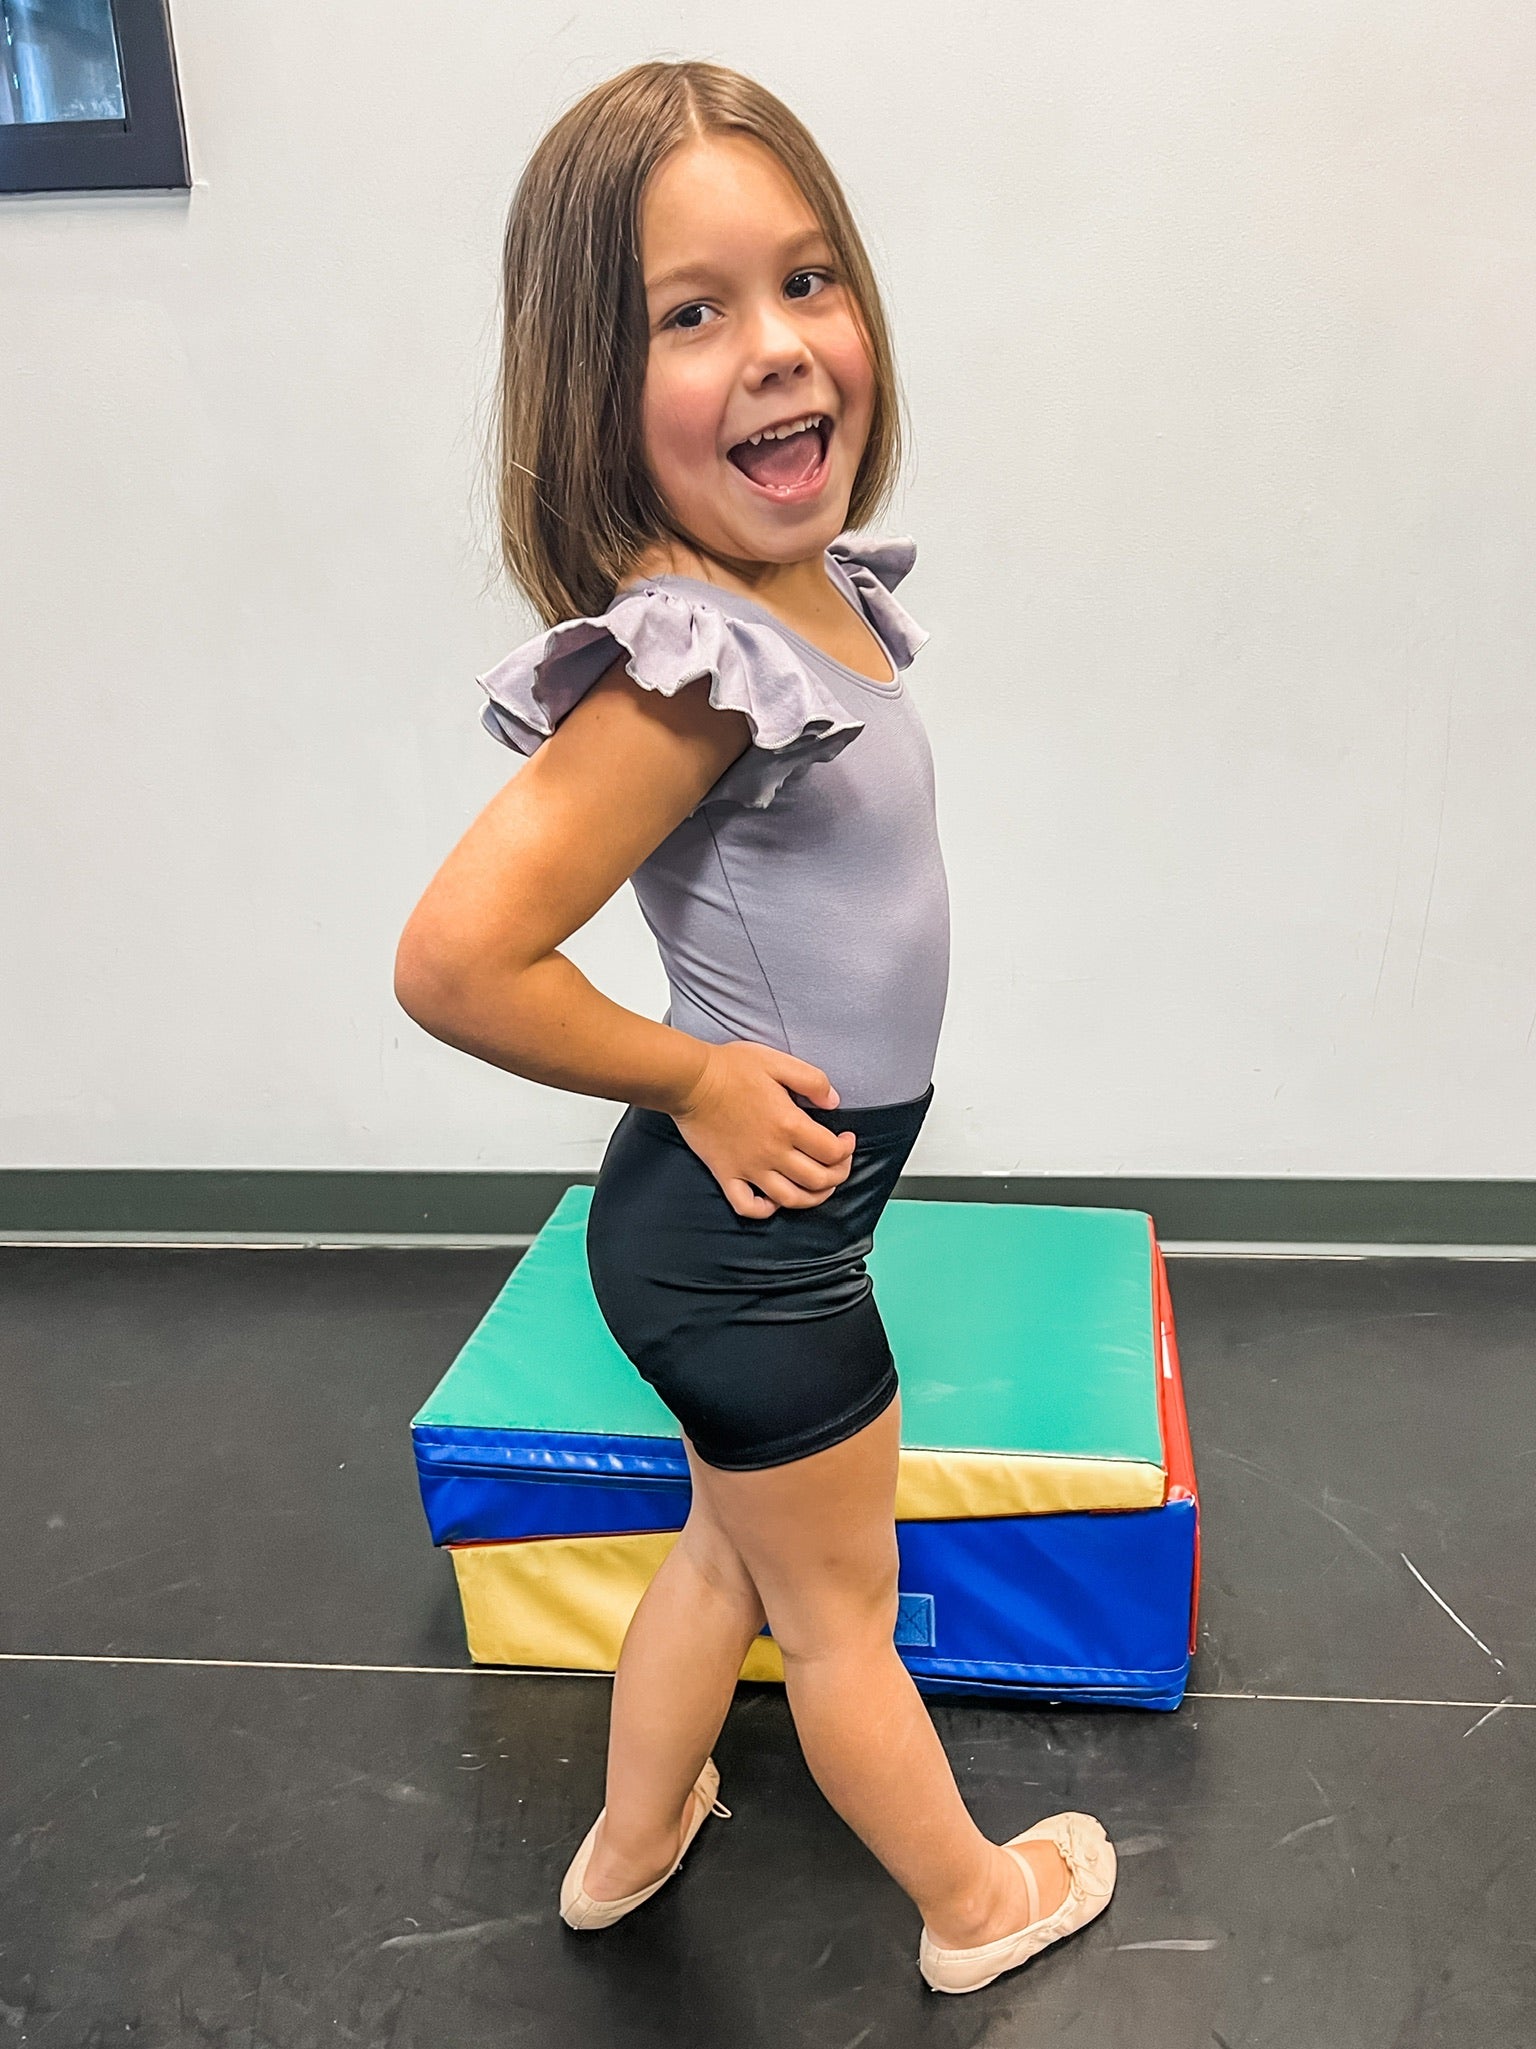 Kids Dance Shorts - Fun & Unique Dance Shorts for Kids of All Ages